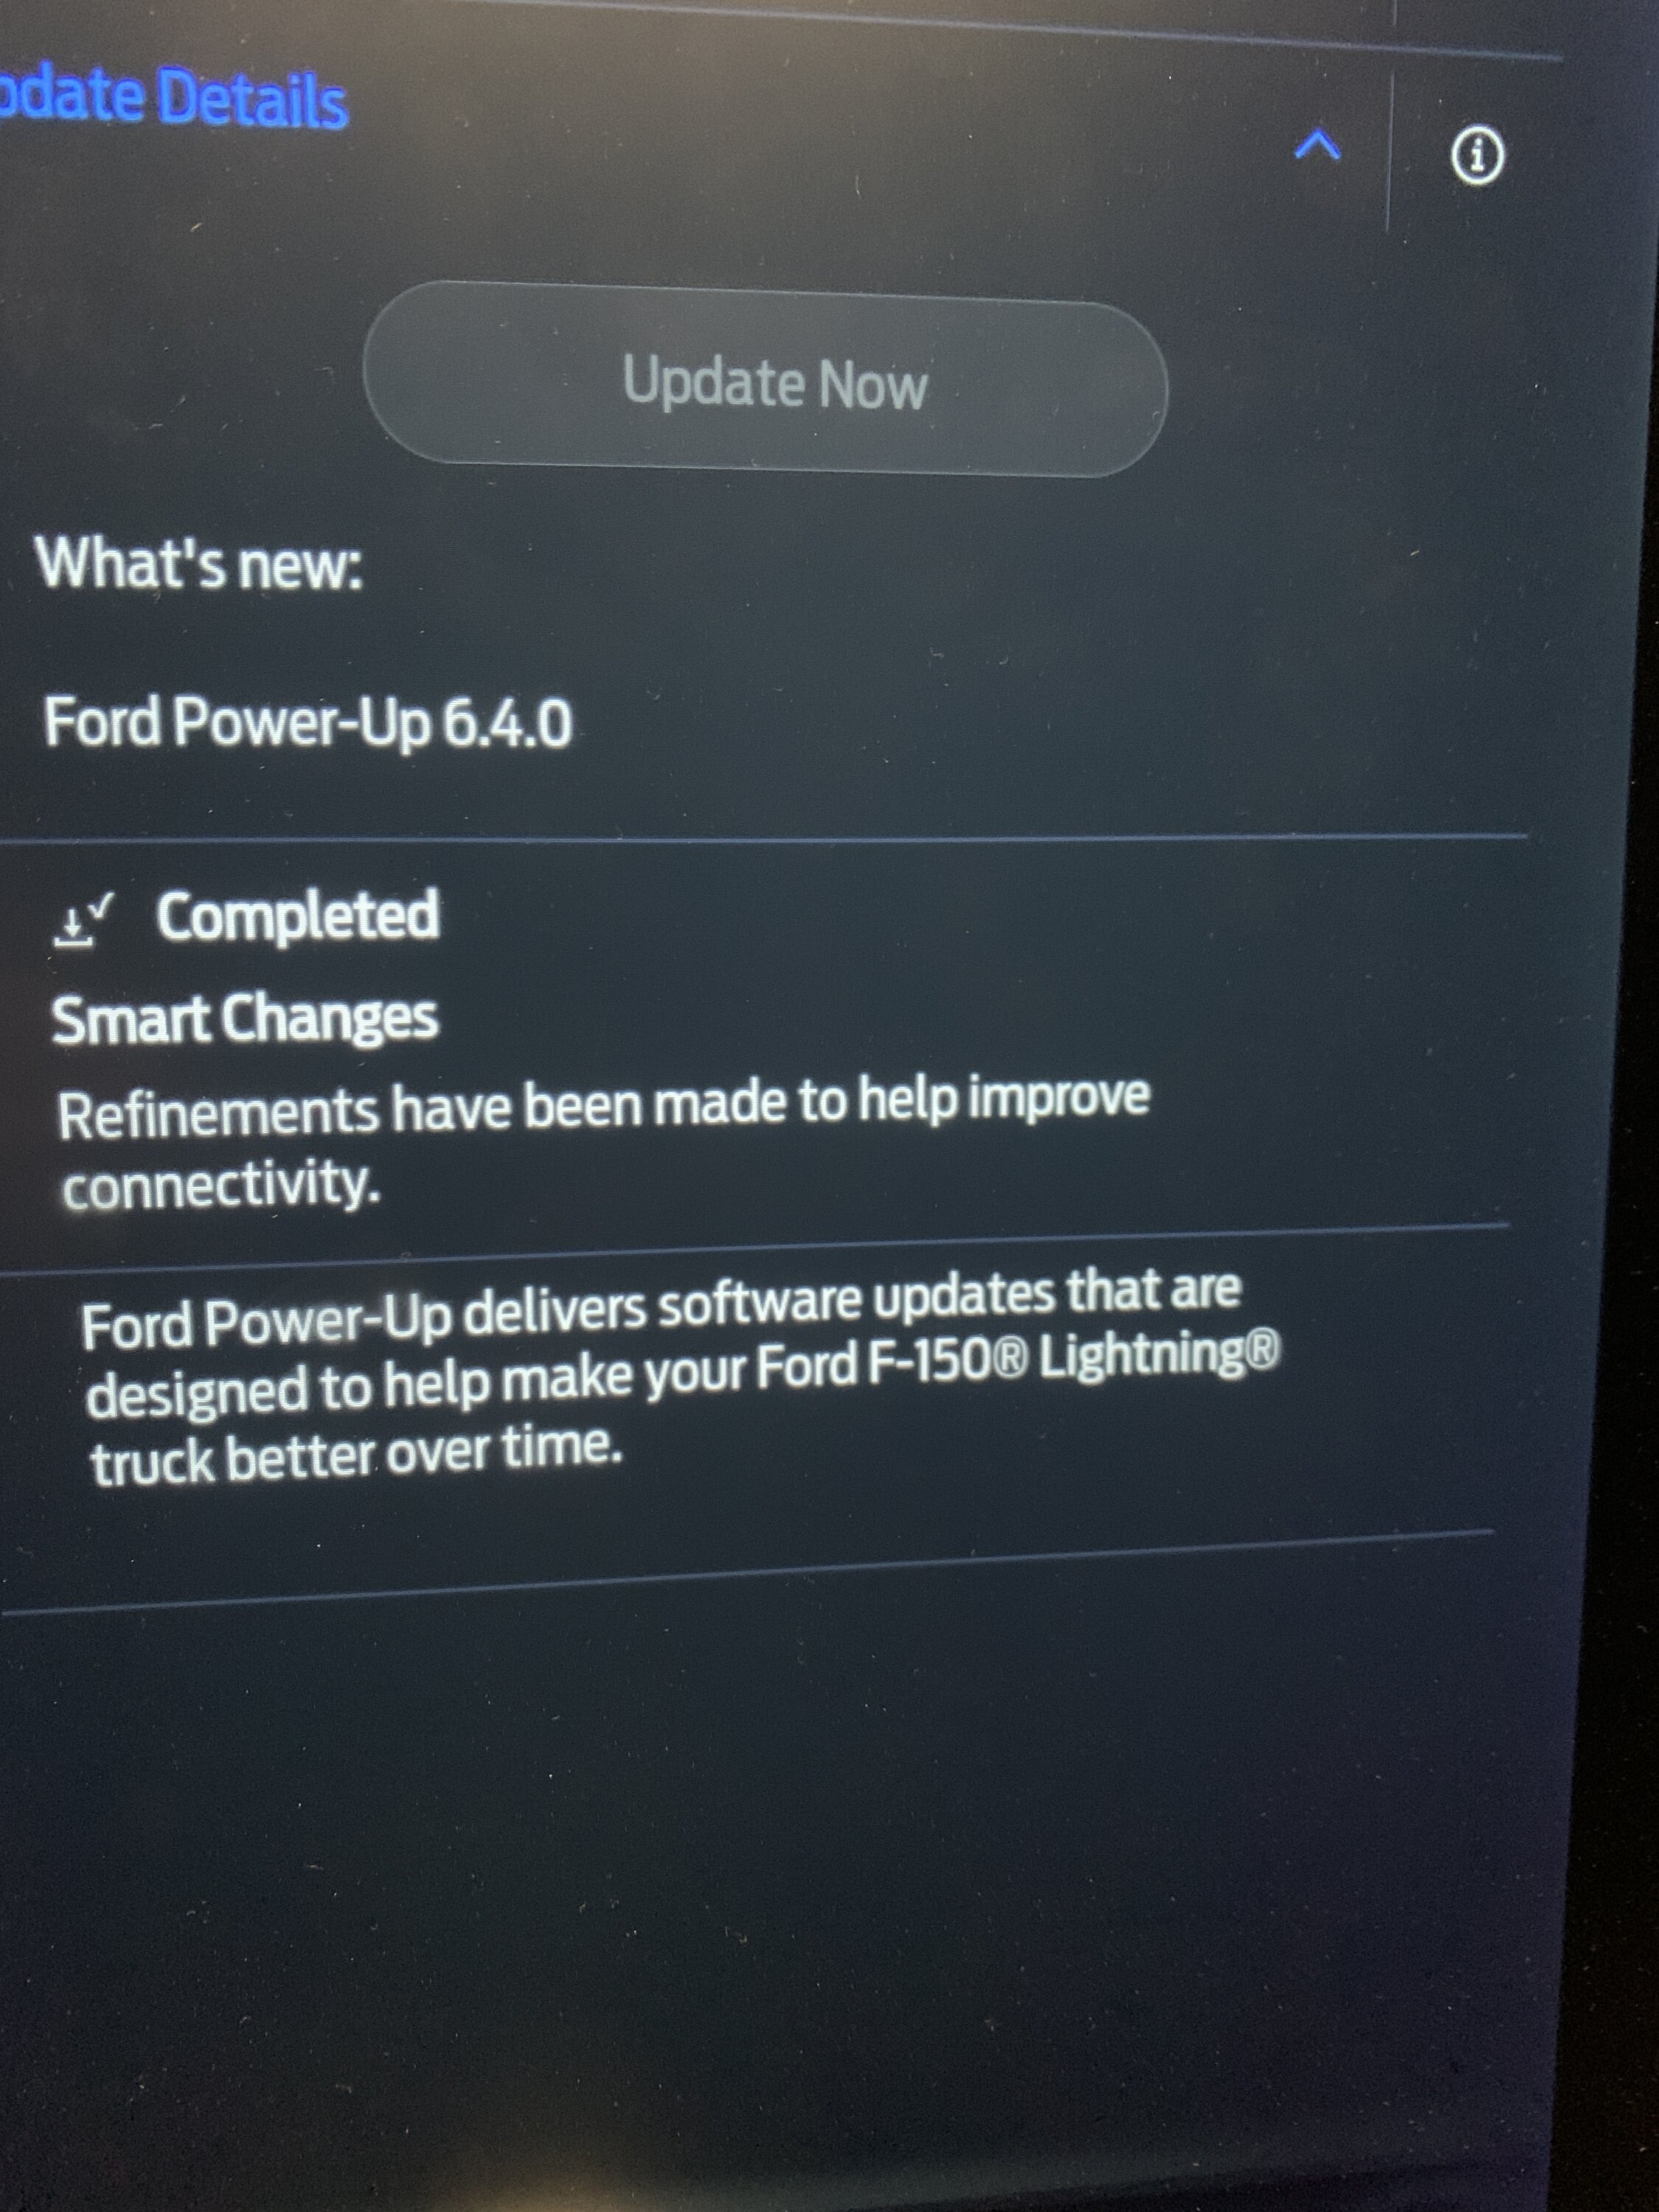 Ford F-150 Lightning Power-Up OTA 6.4.0 - Smart Changes: Refinements to improve connectivity IMG_7135